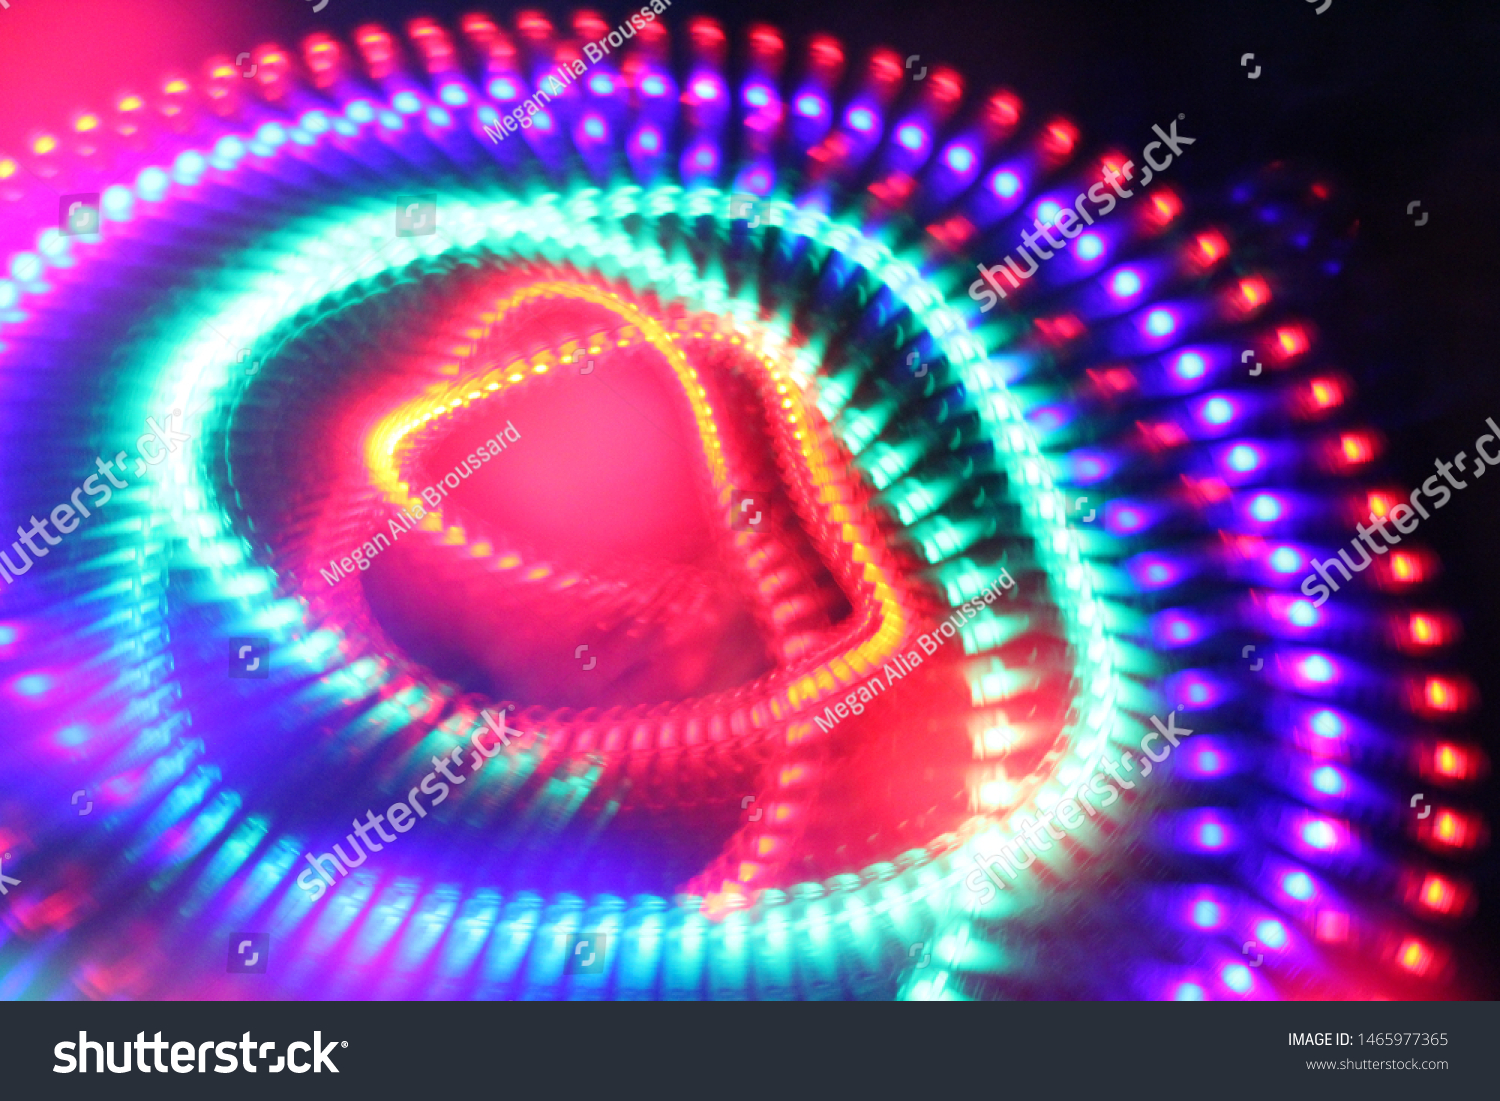 Moving, spinning led lights. Abstract idea of the atom’s nucleus and orbiting electrons as an electron cloud.  #1465977365